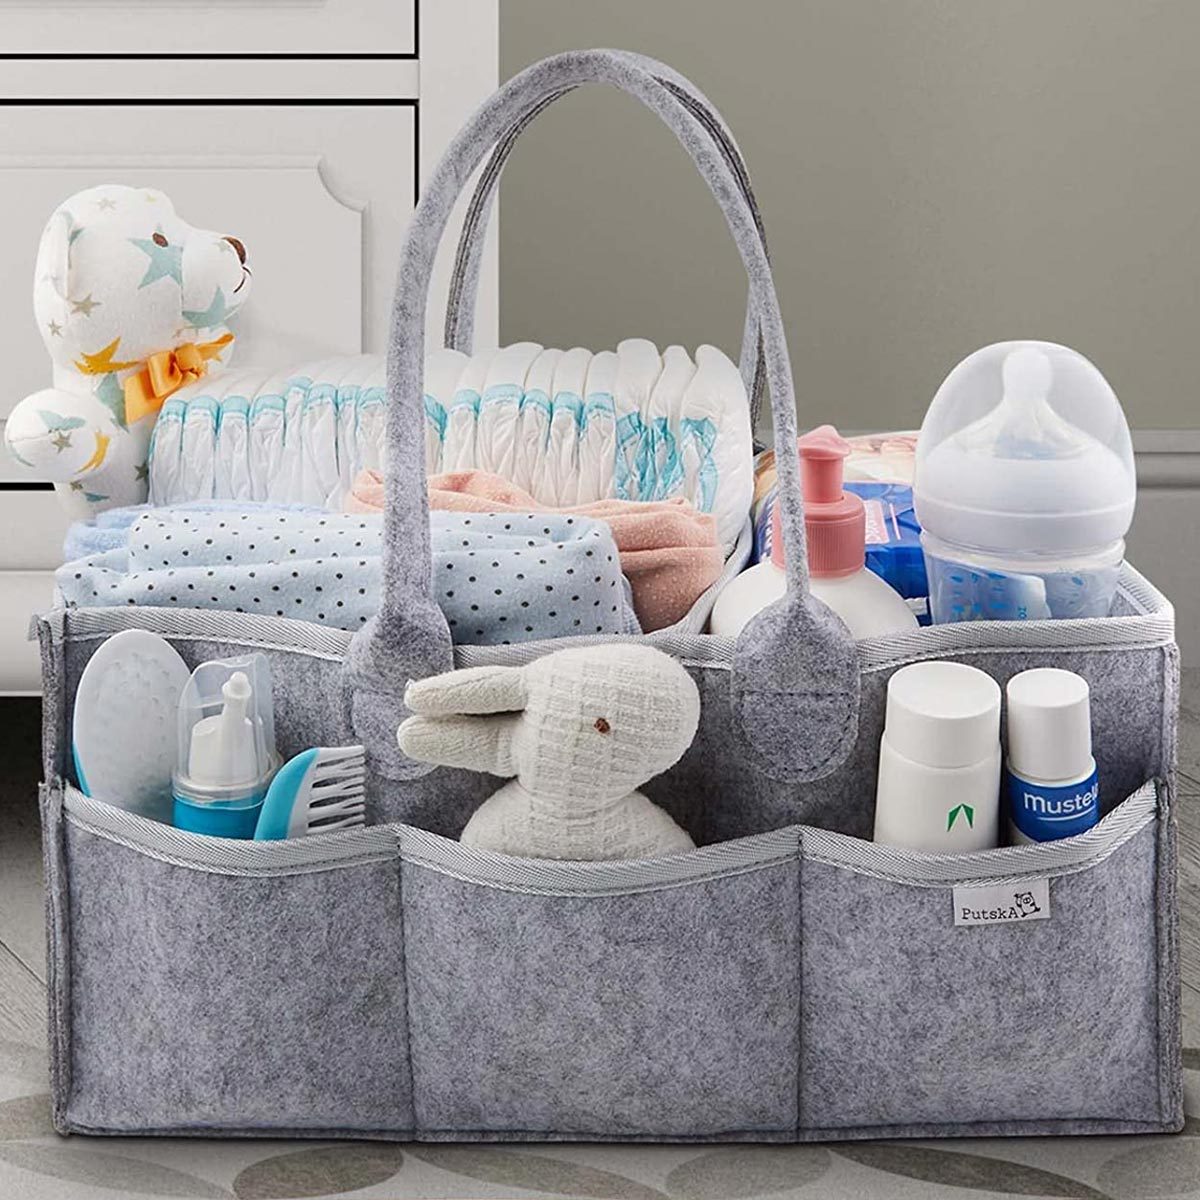 The 35 best baby shower gifts, according to new moms and experts